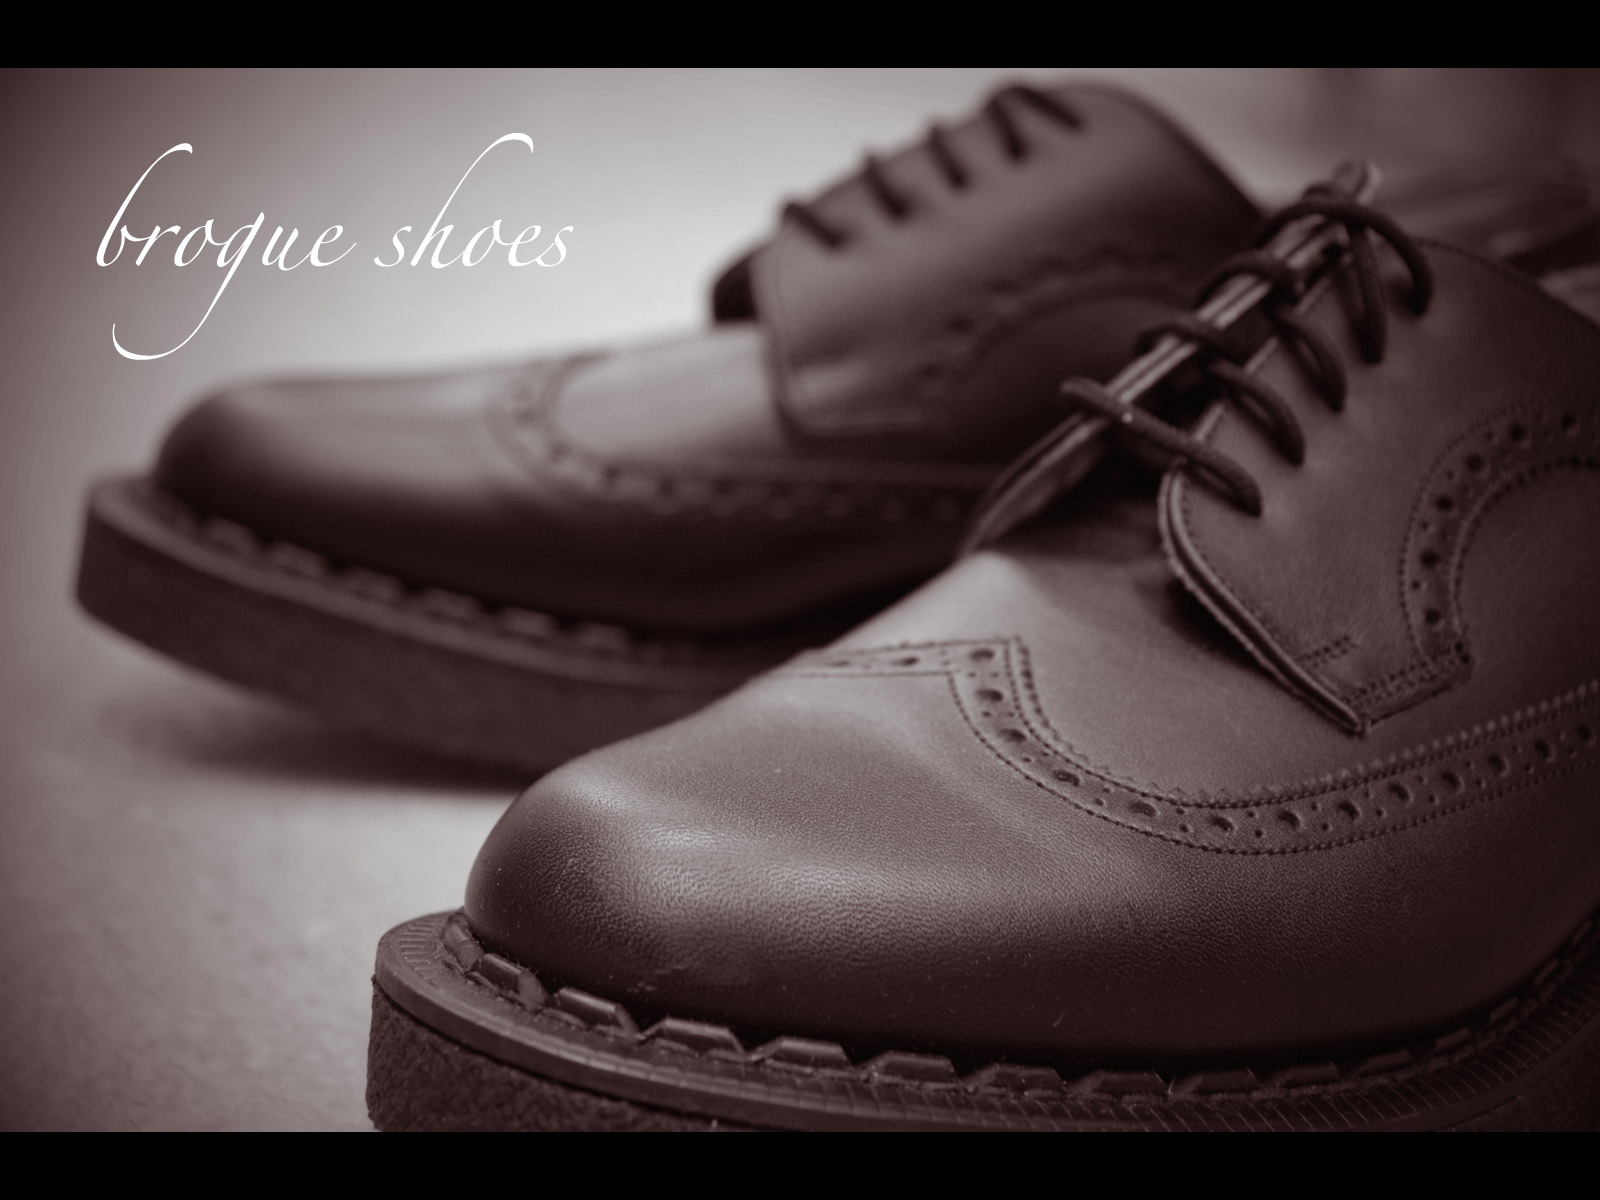 STORY OF BROGUE SHOES